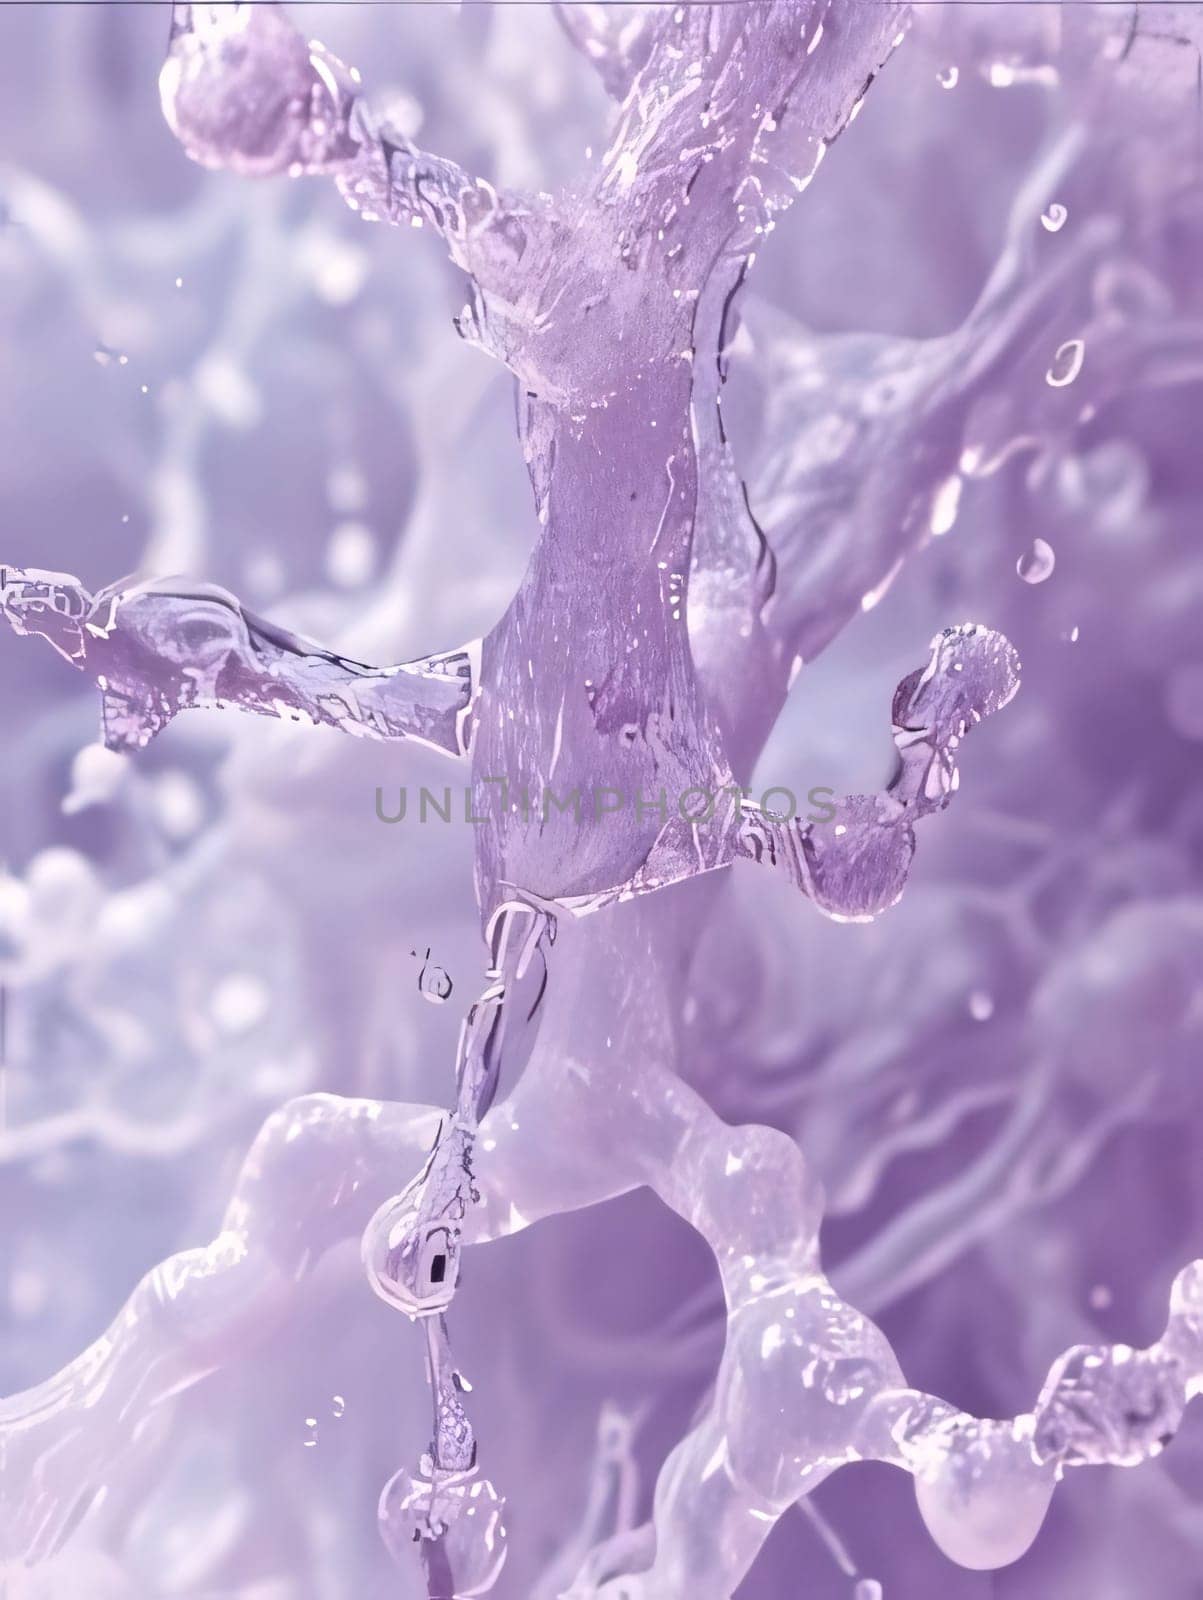 Abstract background design: Splashes of water on a purple background. 3d rendering, 3d illustration.